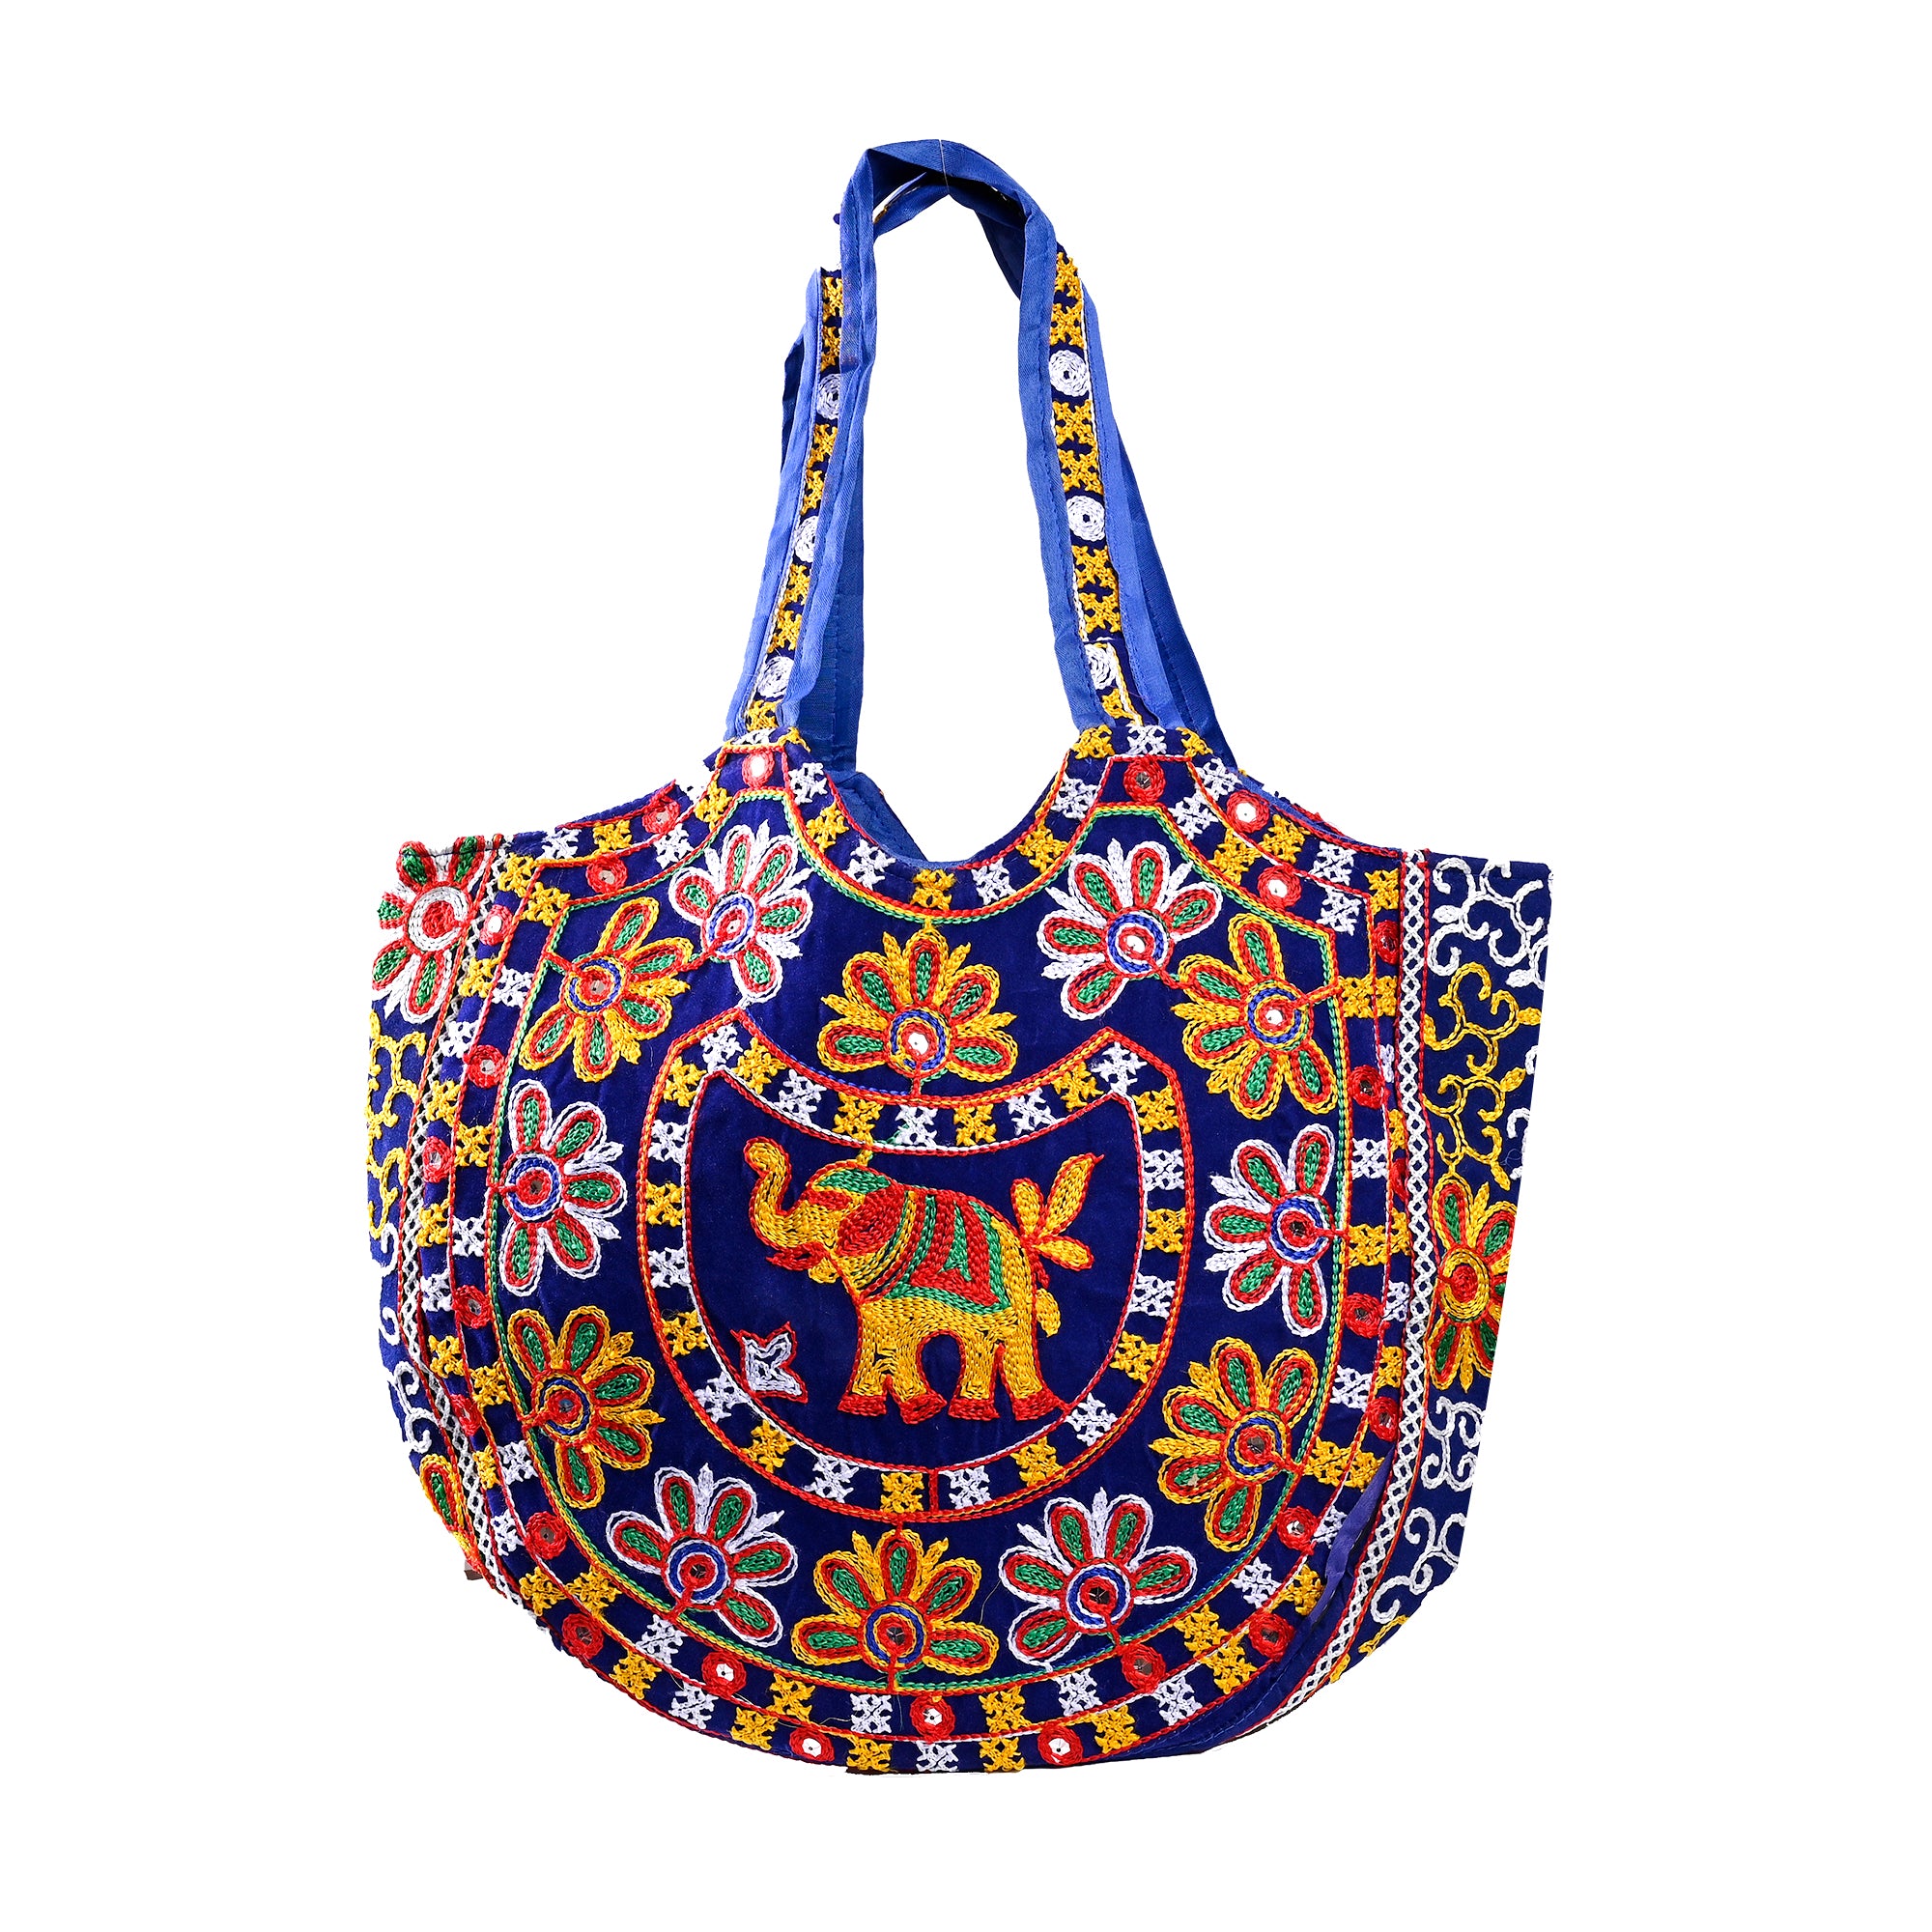 Buy Rajasthani Purse Bag Online In India - Etsy India